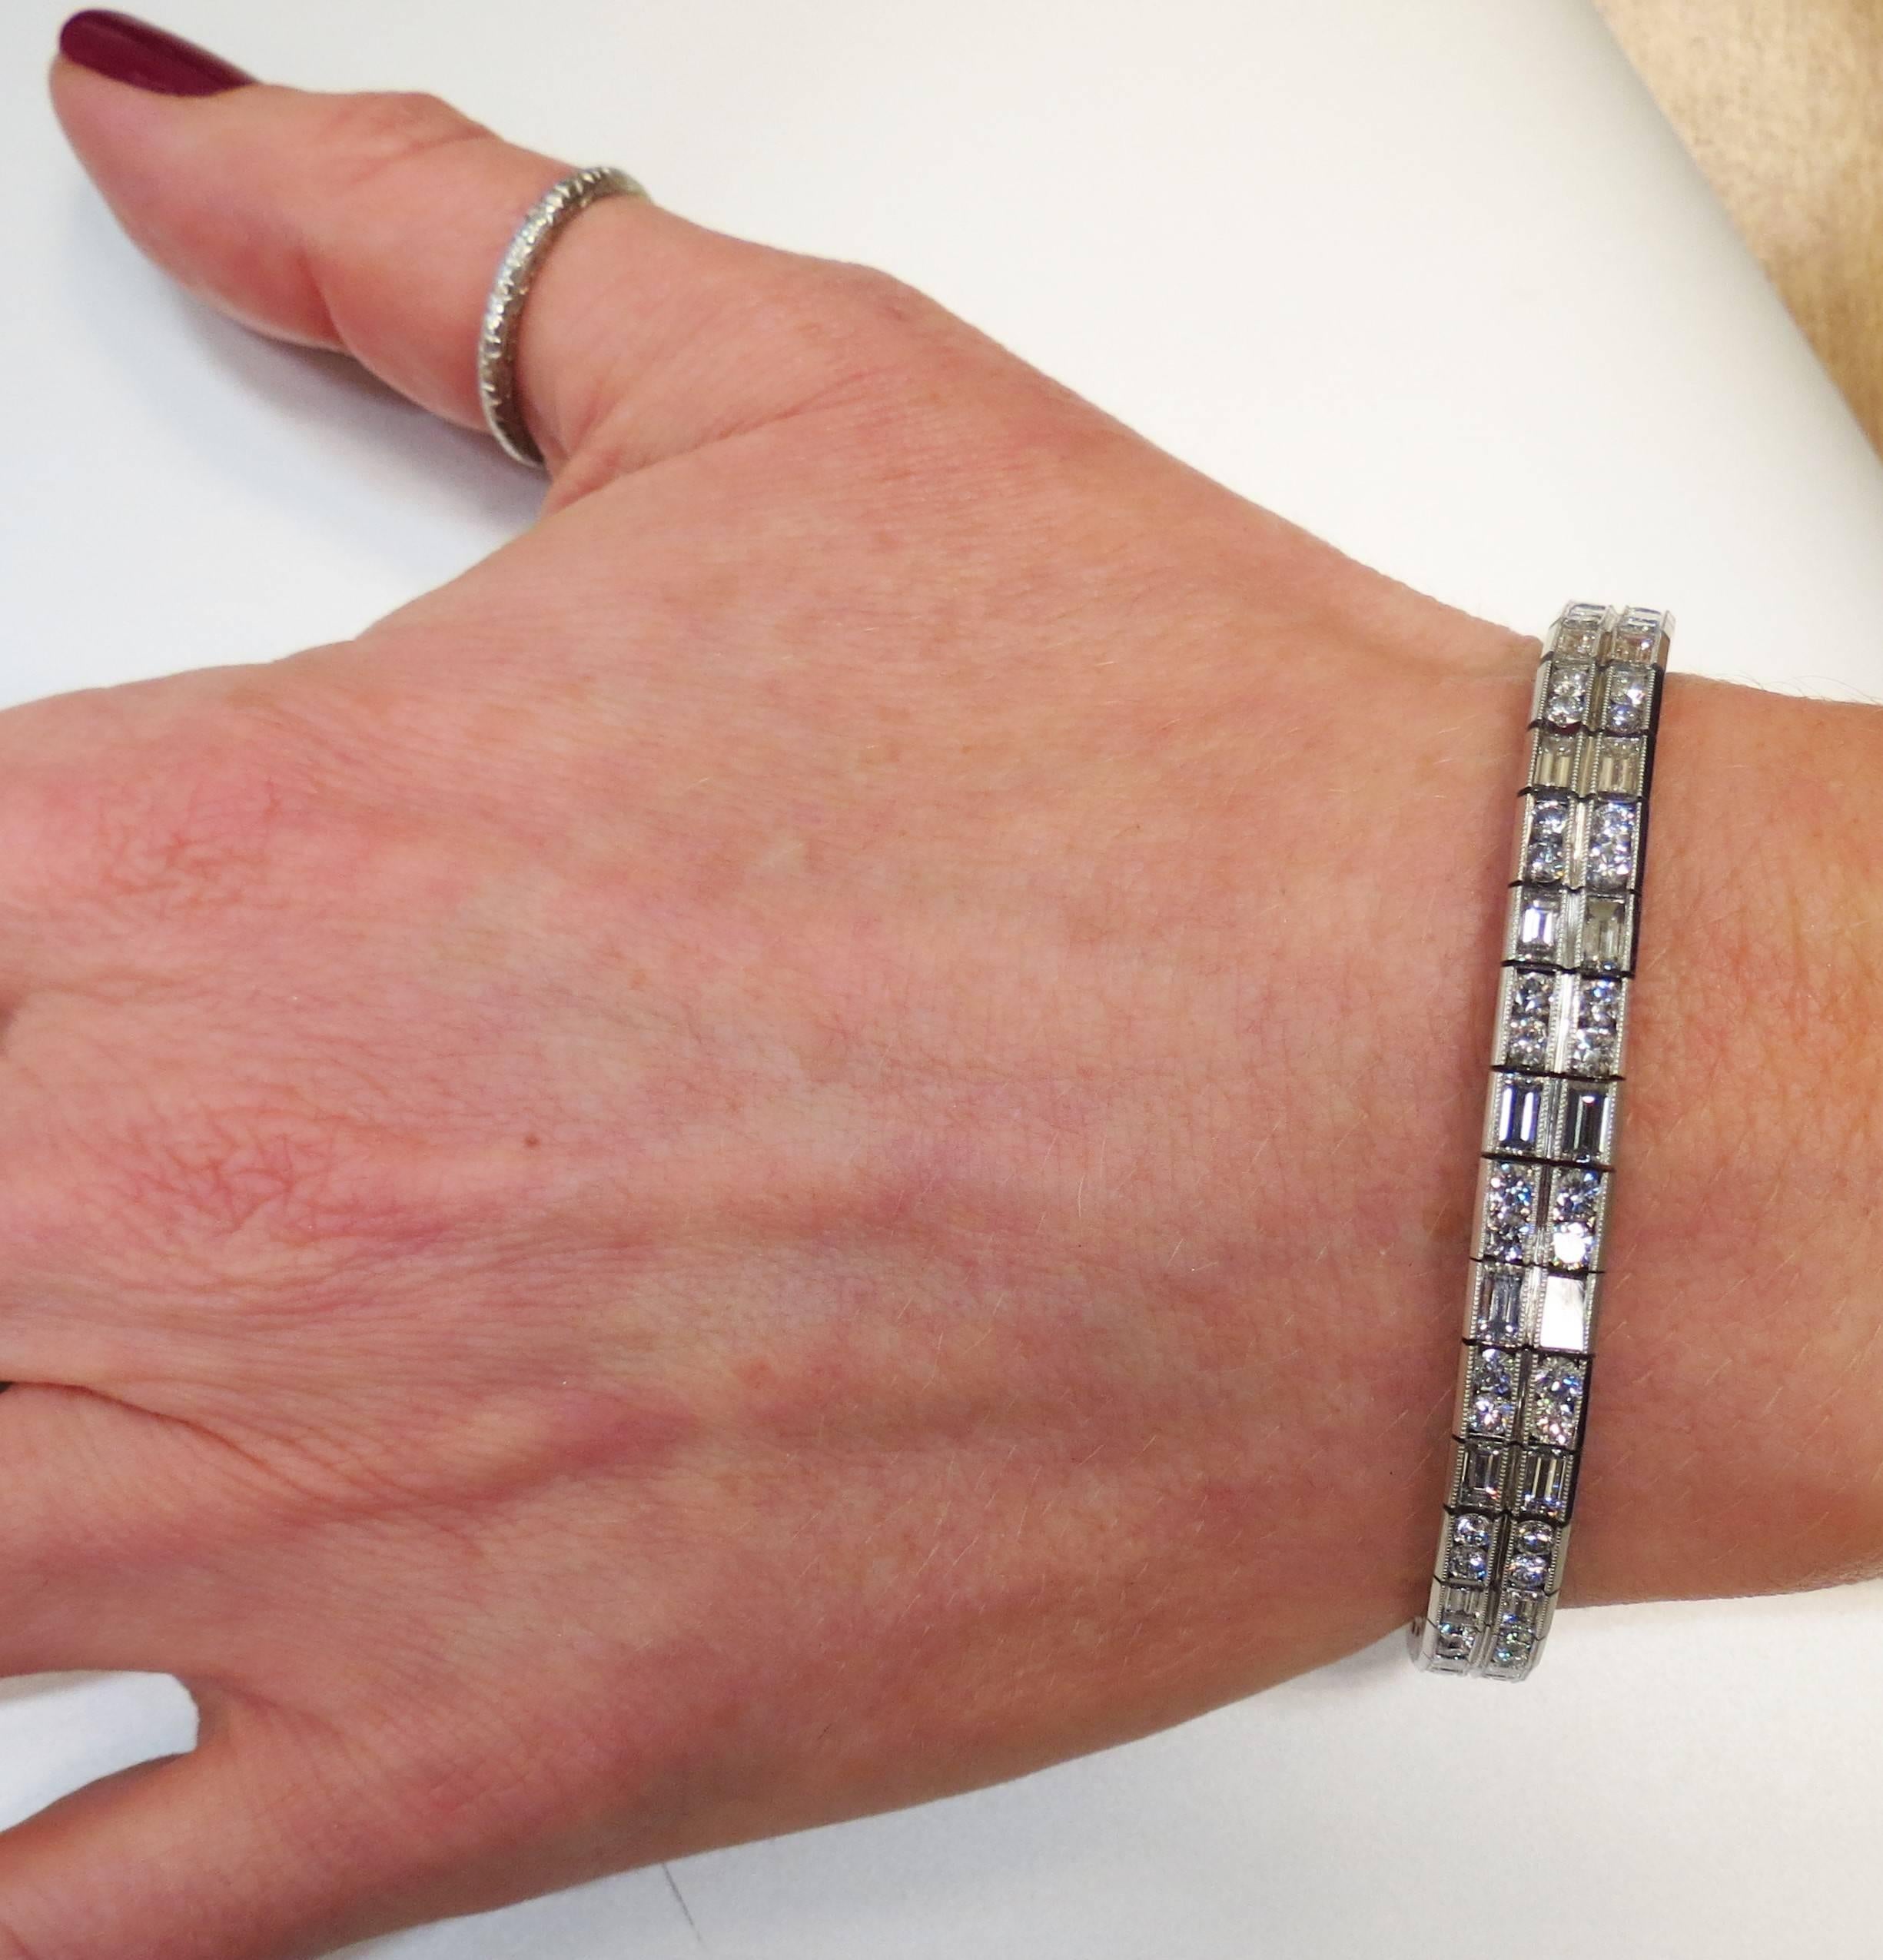 Stunning platinum bracelet, flexible, set with 38 baguette diamonds weighing 5.80cts and 76 full cut round diamonds weighing 3.80cts, FG color, VS clarity.

6.75 inches in length
.25 inches in width 